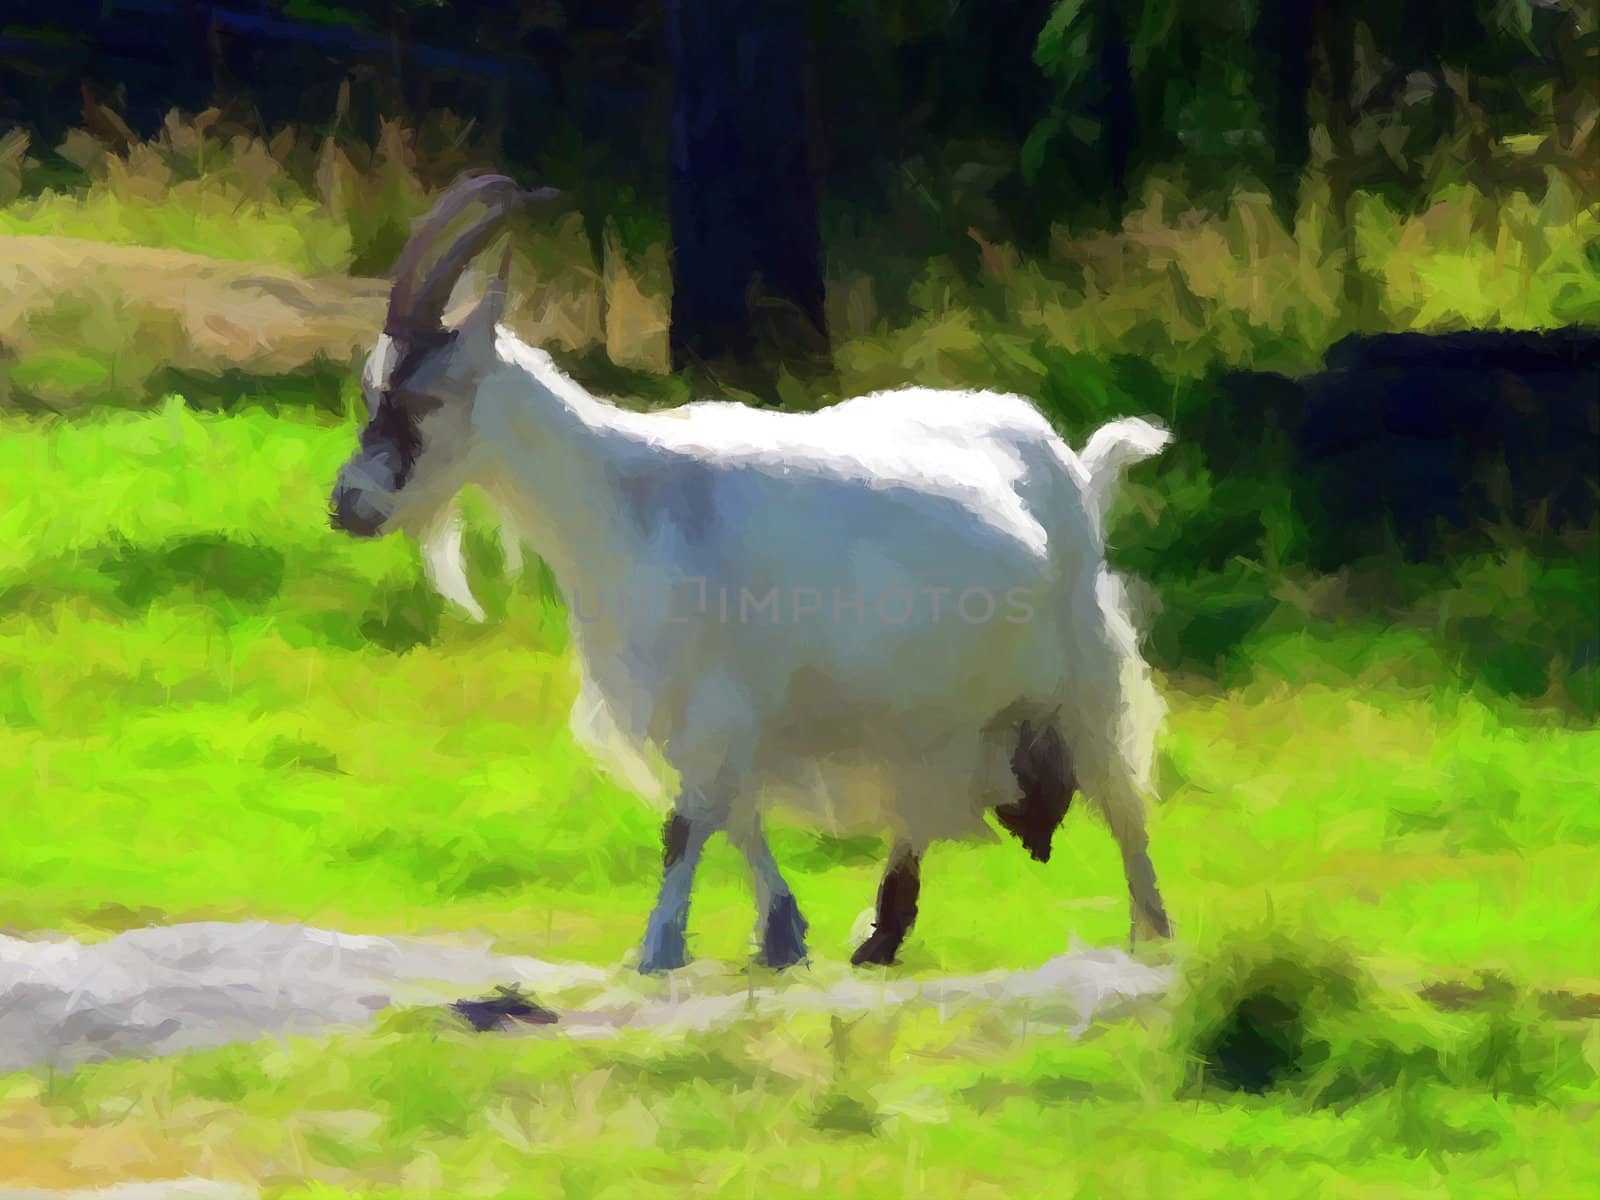 A white goat grazing in the field.